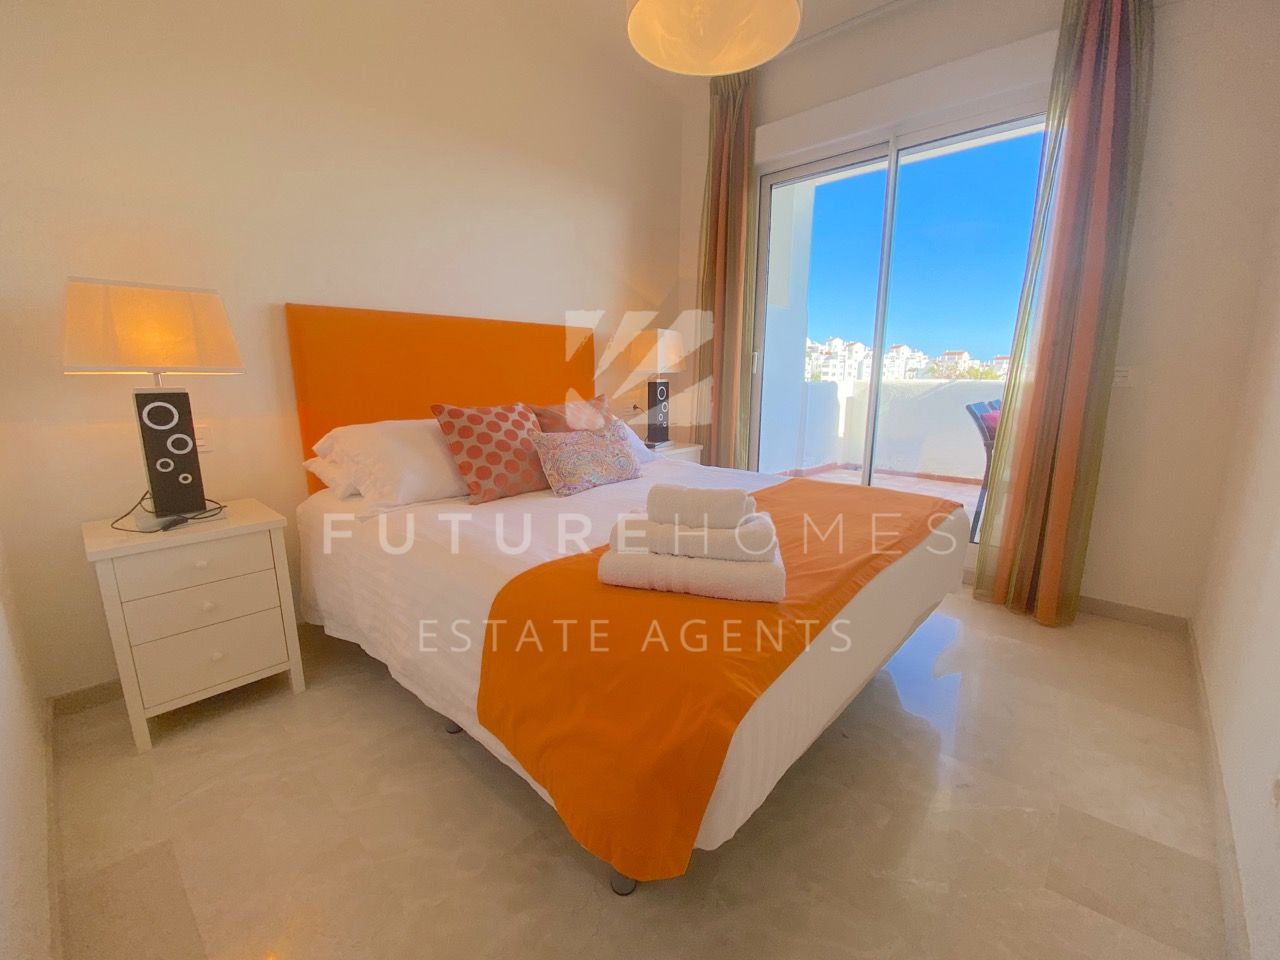 Absolute front line golf apartment with sea views ready to move into 5 minutes drive from Estepona port!